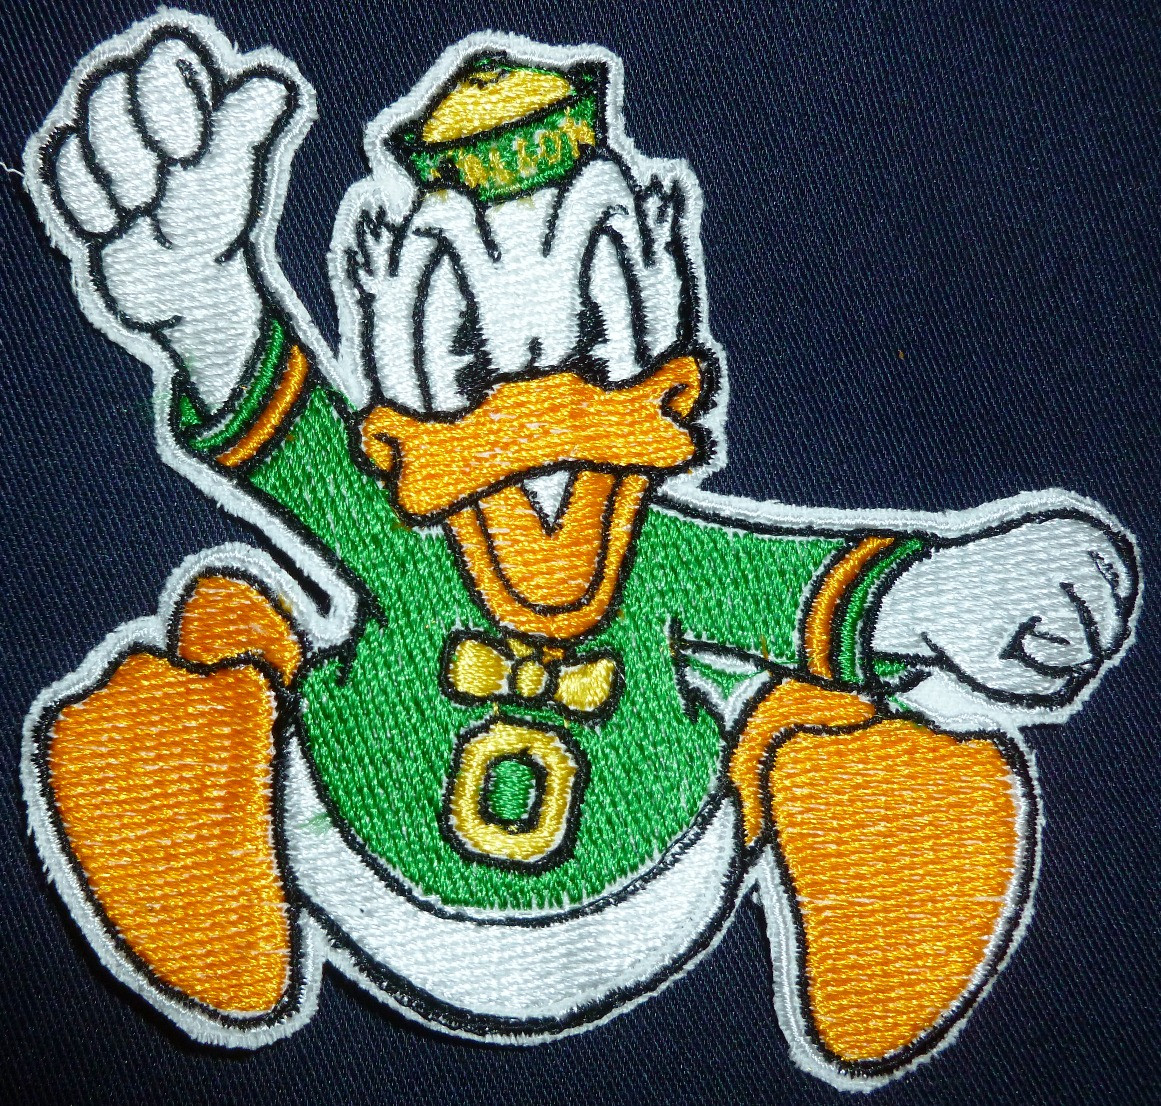 Donald Duck Iron on Patch Duck Patches Heart Patches Iron on 